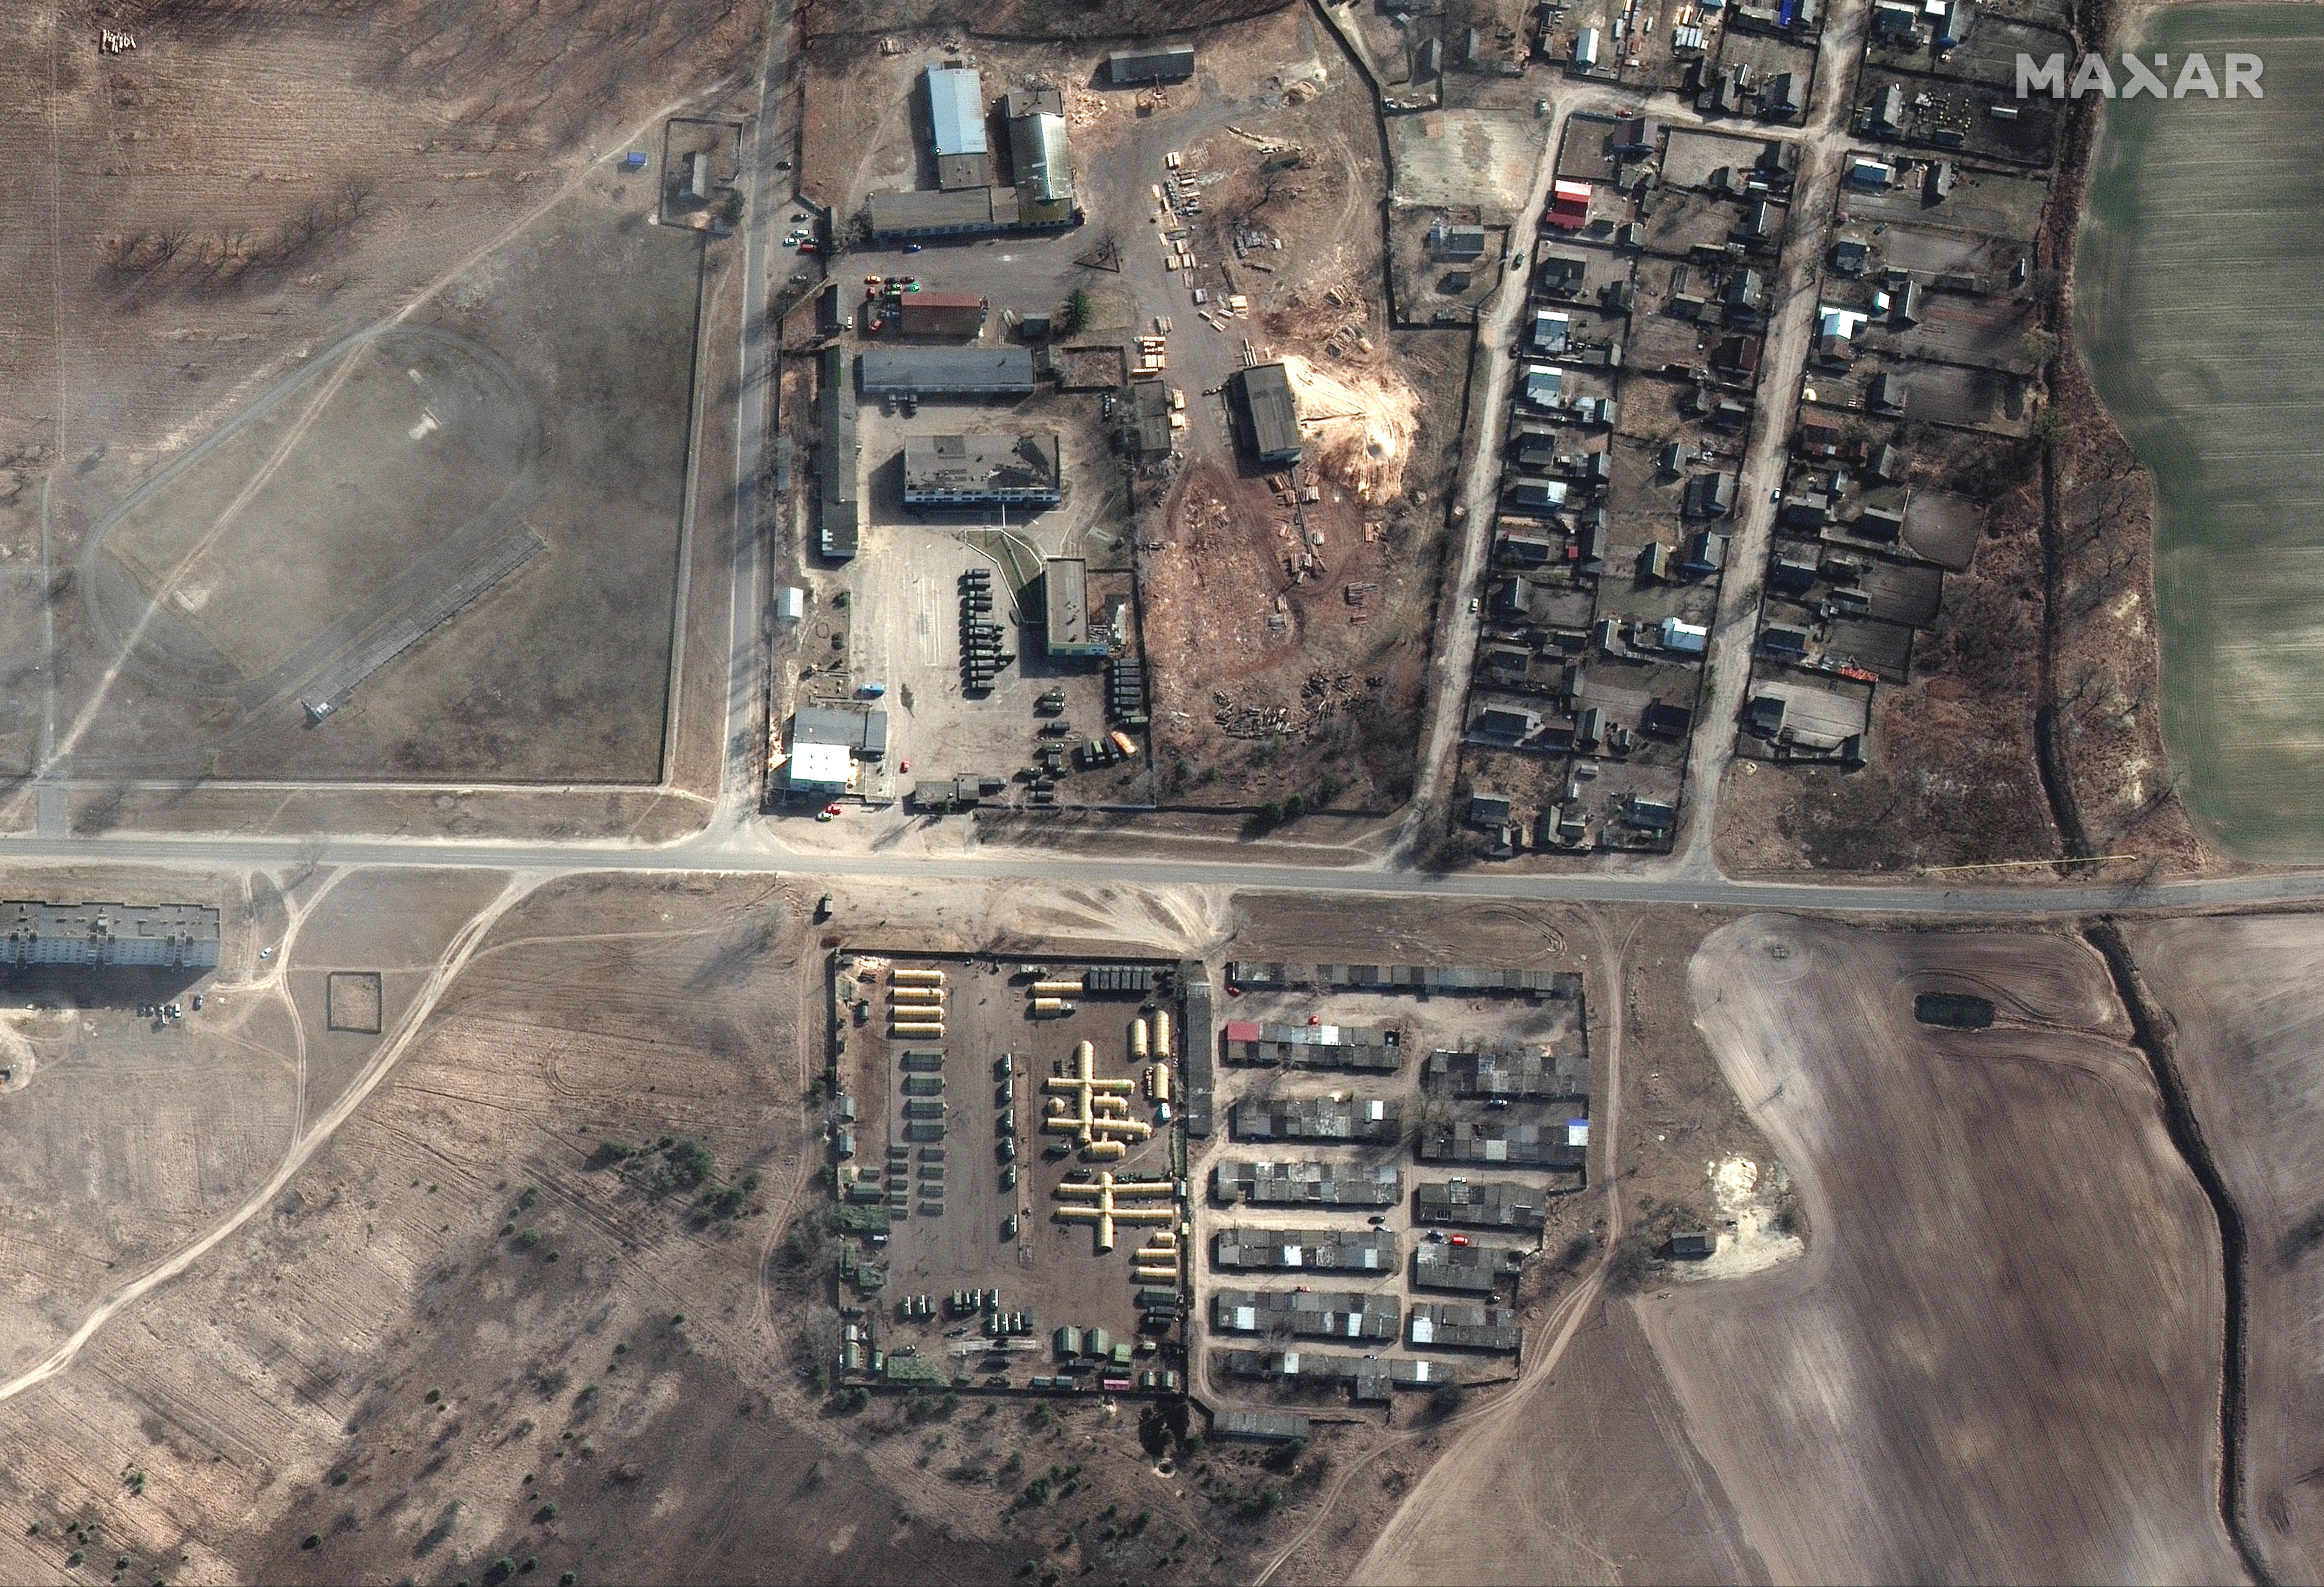 Satellite shot of a military hospital and compound at an airport.